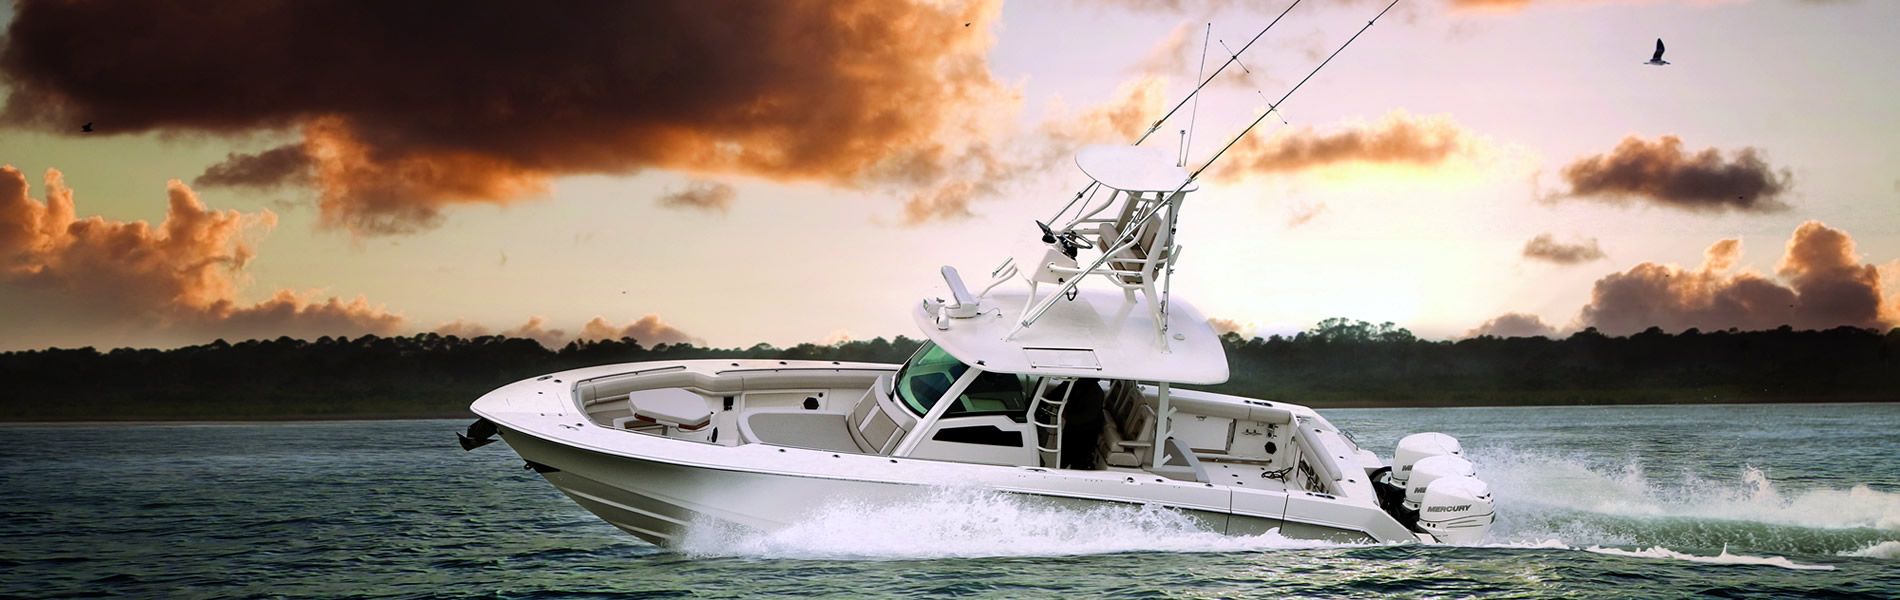 Get More Deals Done With Expert Boat Financing